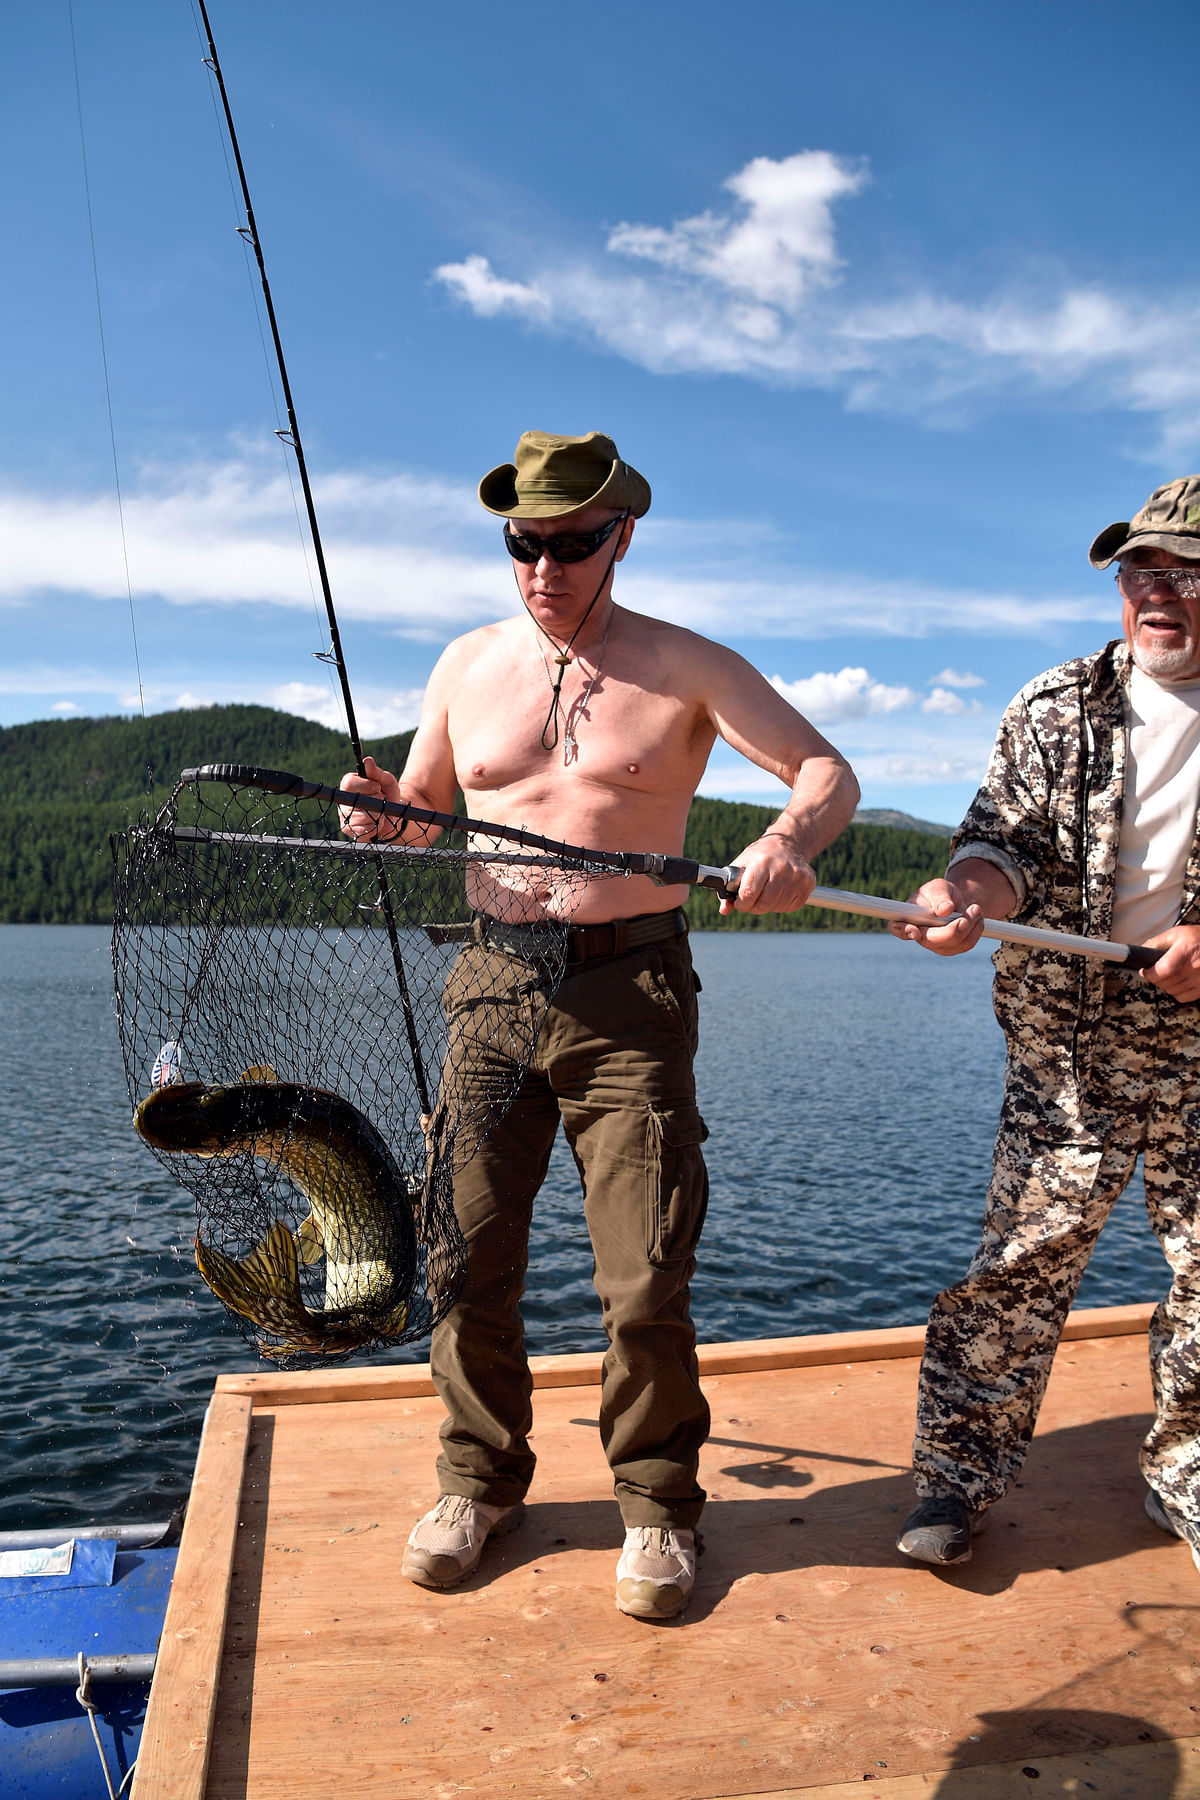  Russian President Vladimir Putin has gone spearfishing in southern Siberia’s mountains.